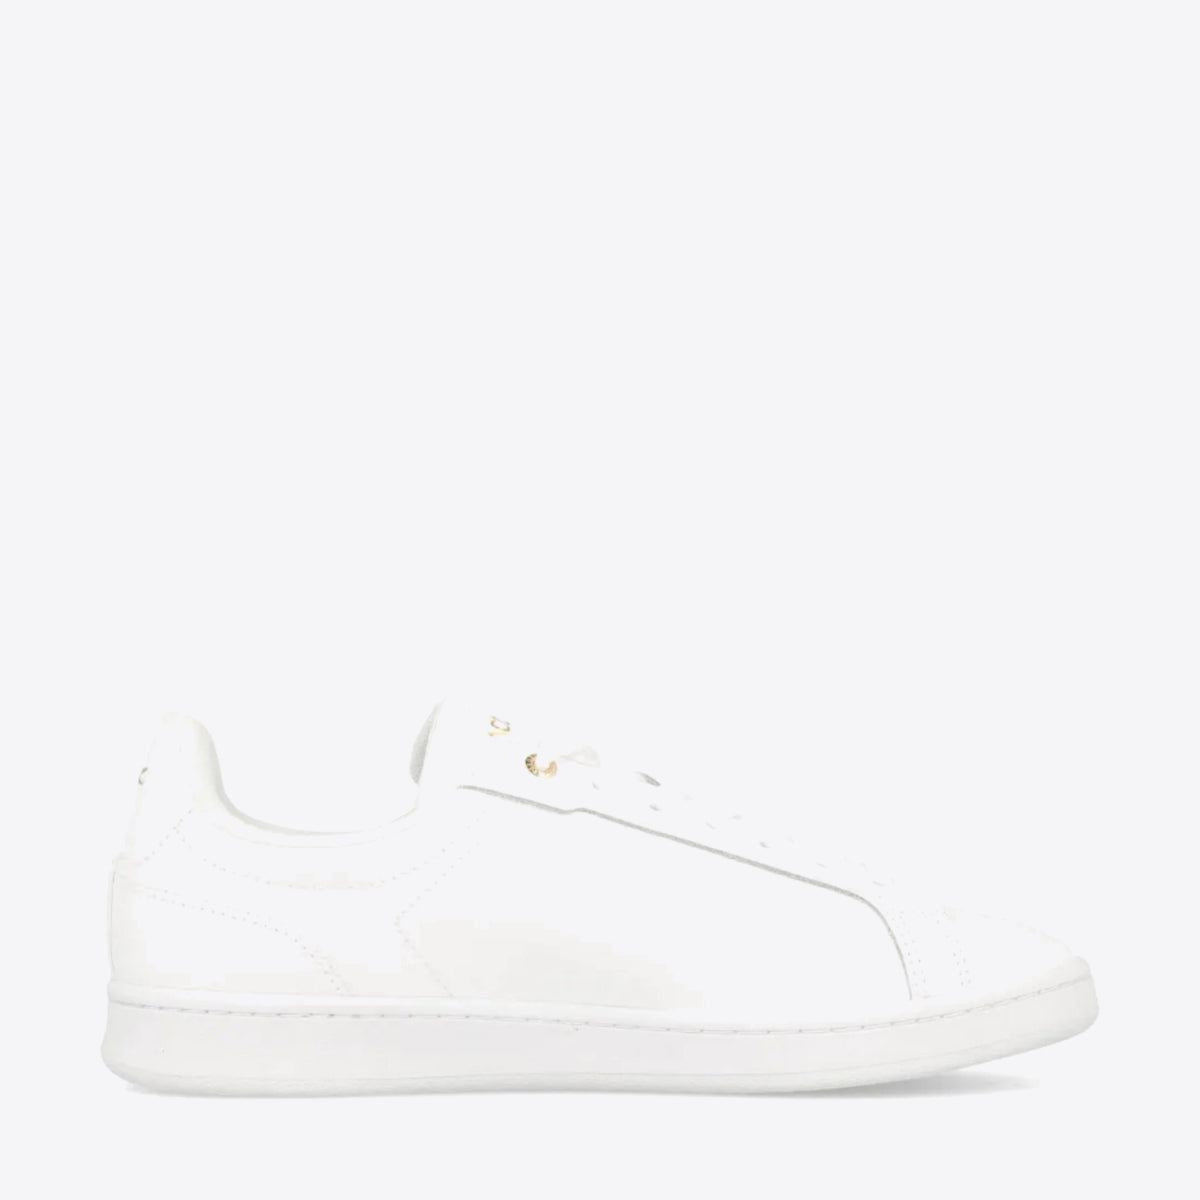 LACOSTE Carnaby Pro White - Image 2